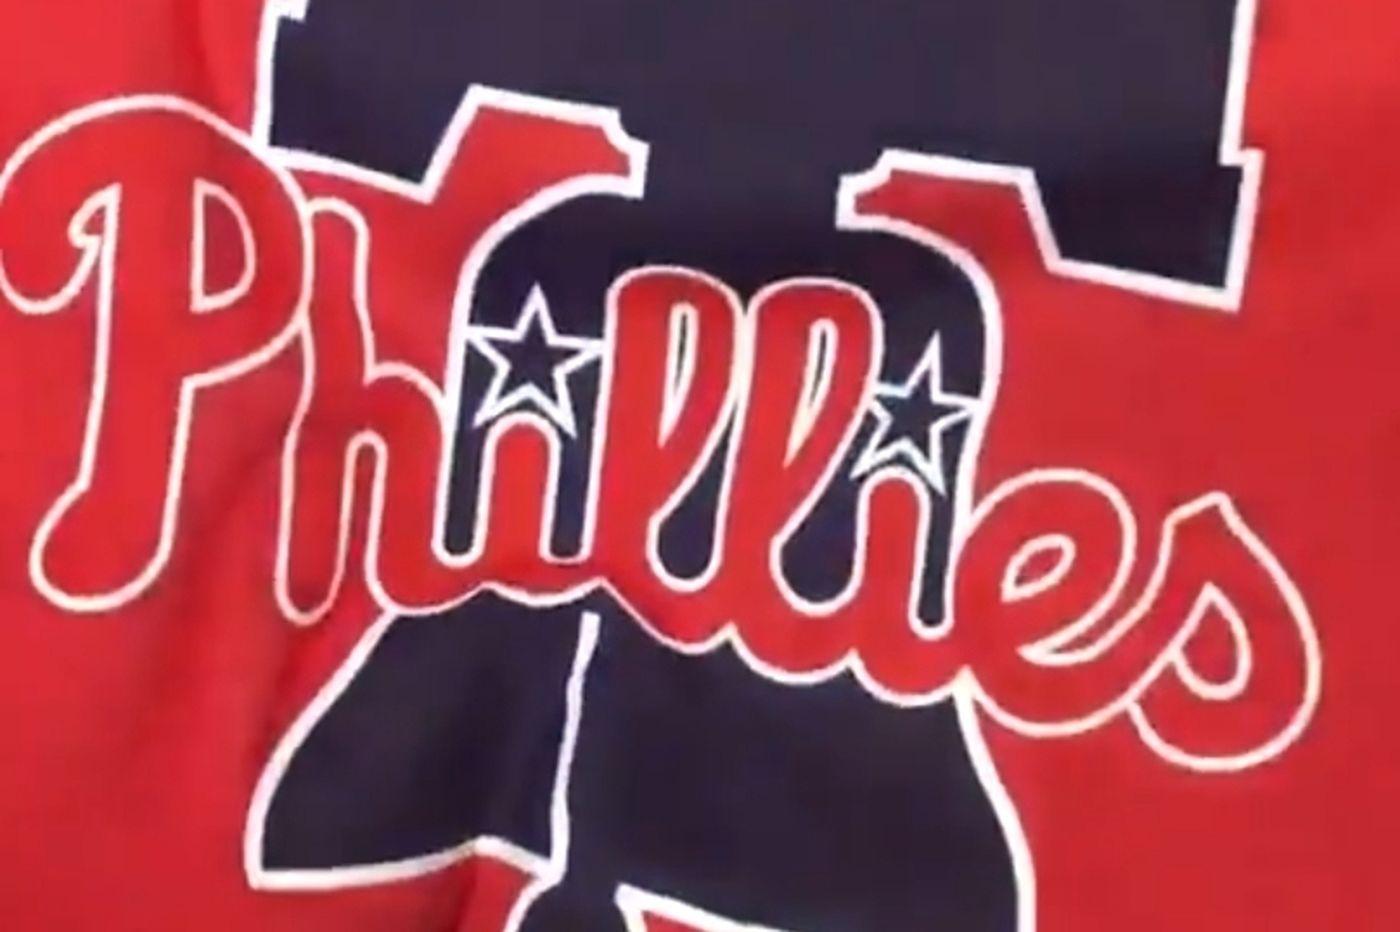 First Phillies Logo - Phillies reveal new primary logo